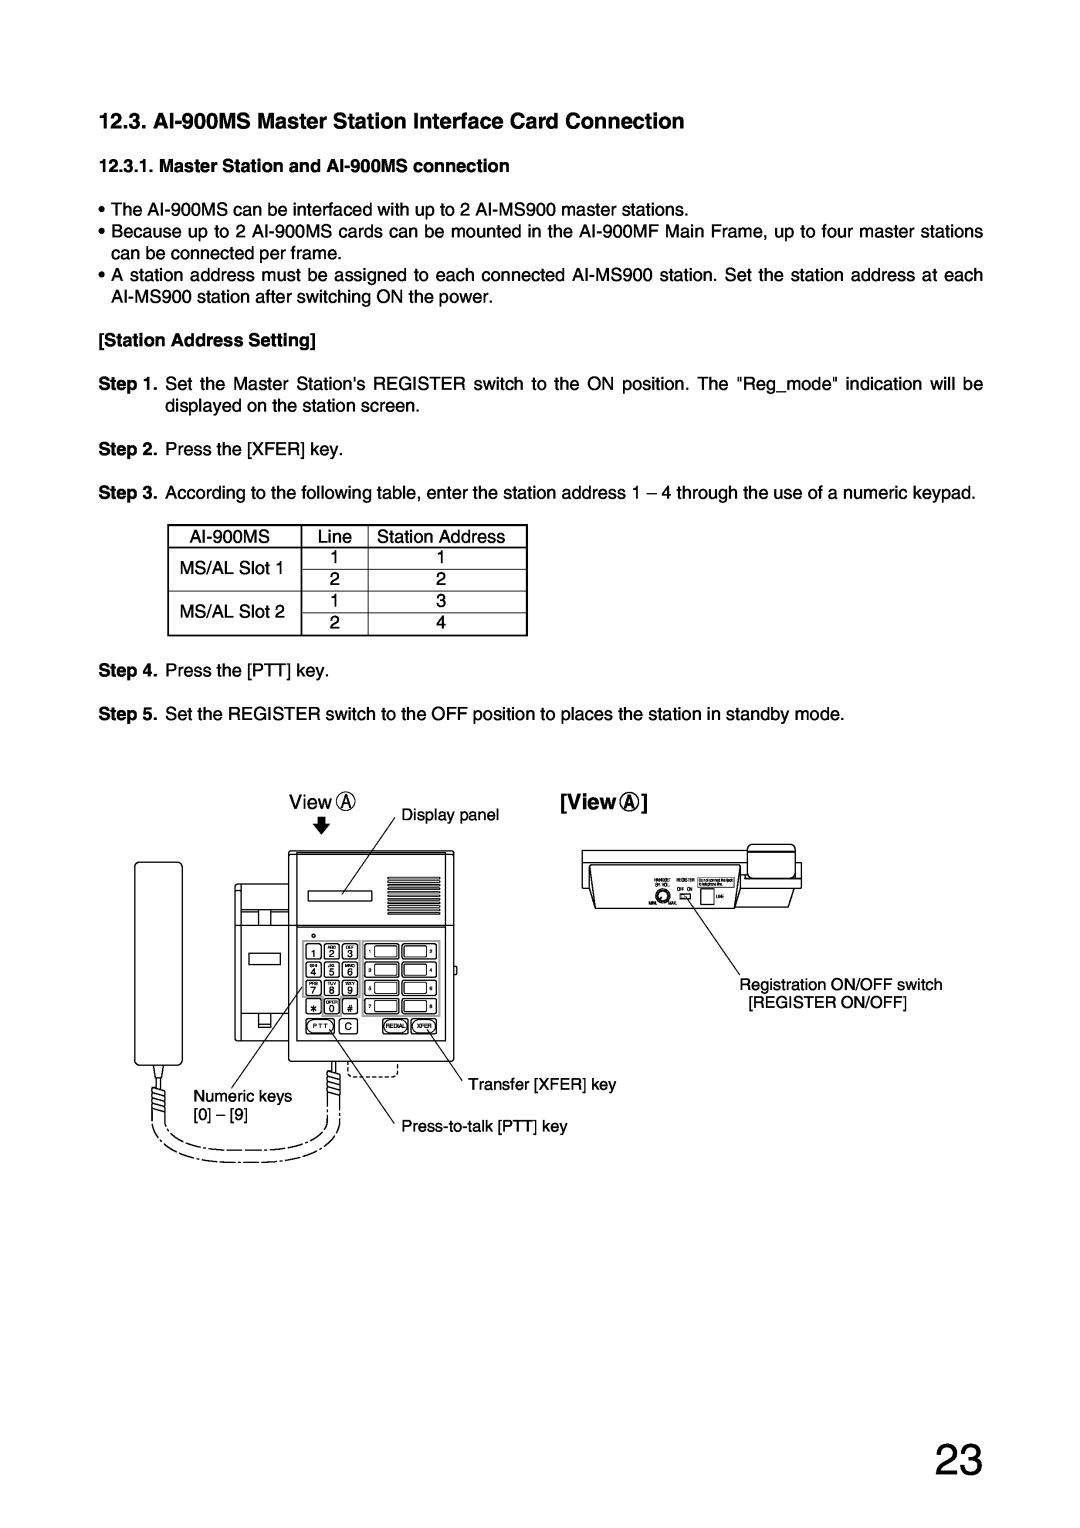 Aiphone installation manual View A, Master Station and AI-900MSconnection, Station Address Setting 